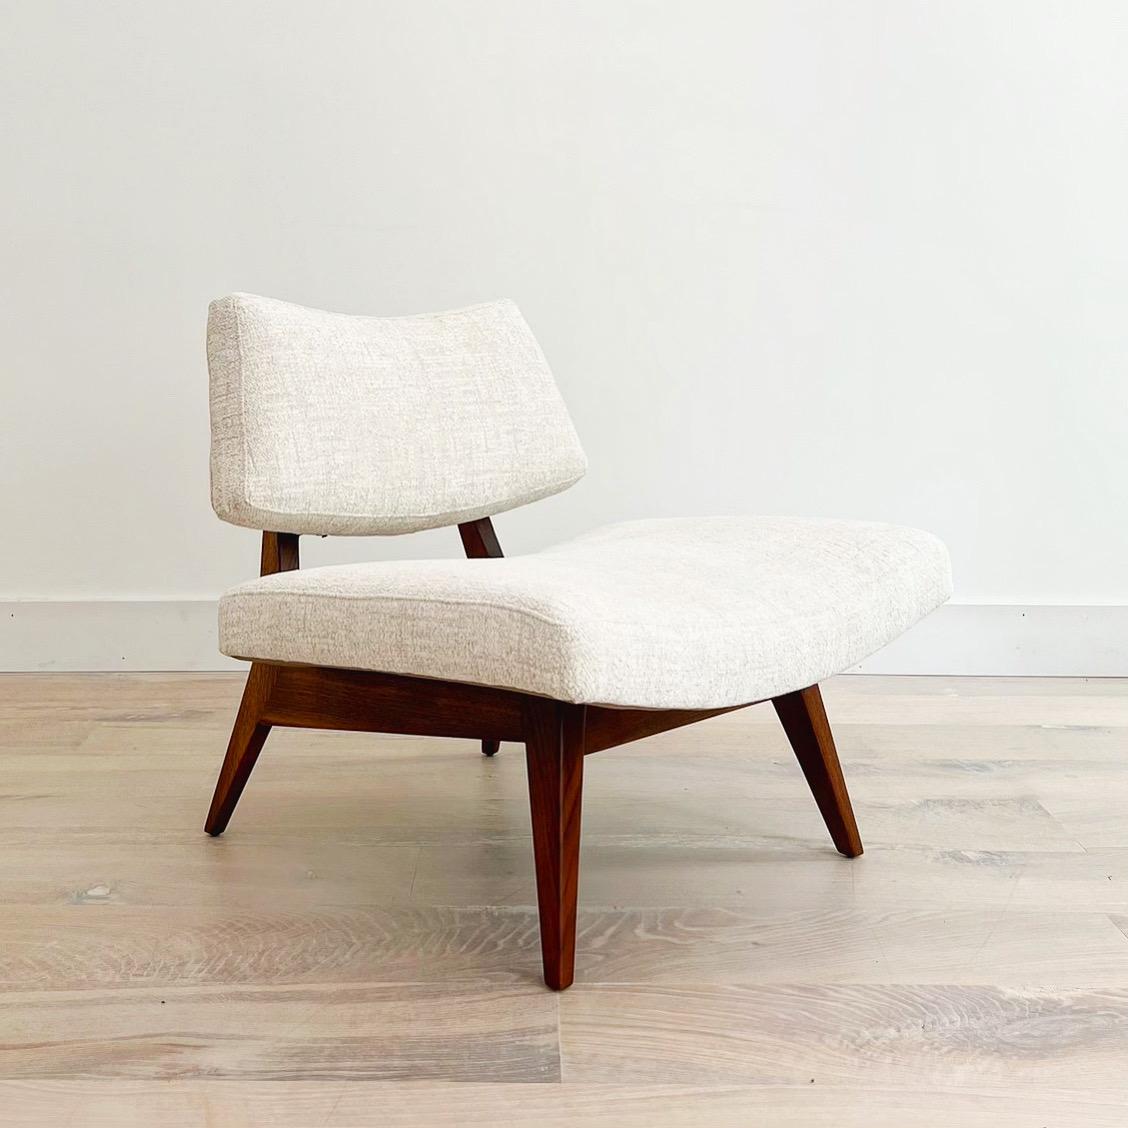 Early Jens Risom low lounge chair in solid American black walnut and a creamy white boucle. Oversized and stout with clean modern lines, a generously deep seat and a curved back. Subtle, yet striking - this chair commands a space while providing the